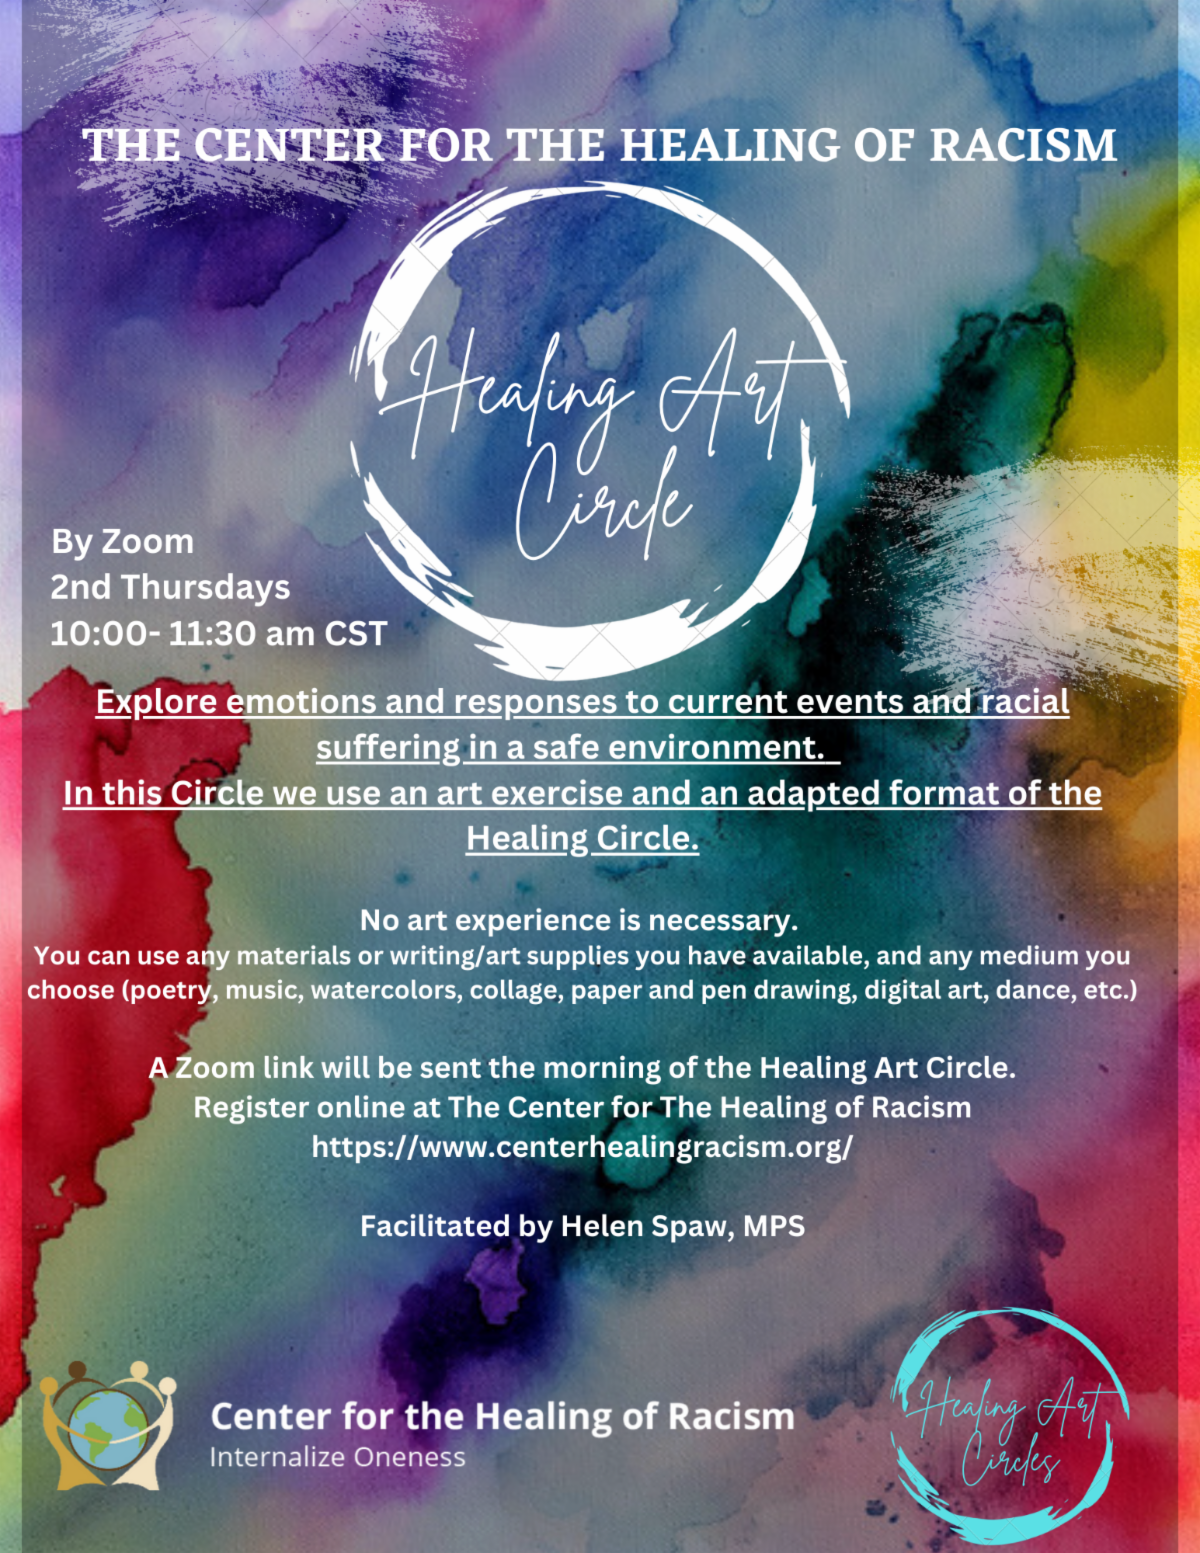 Healing Art Circle - The Center for the Healing of Racism